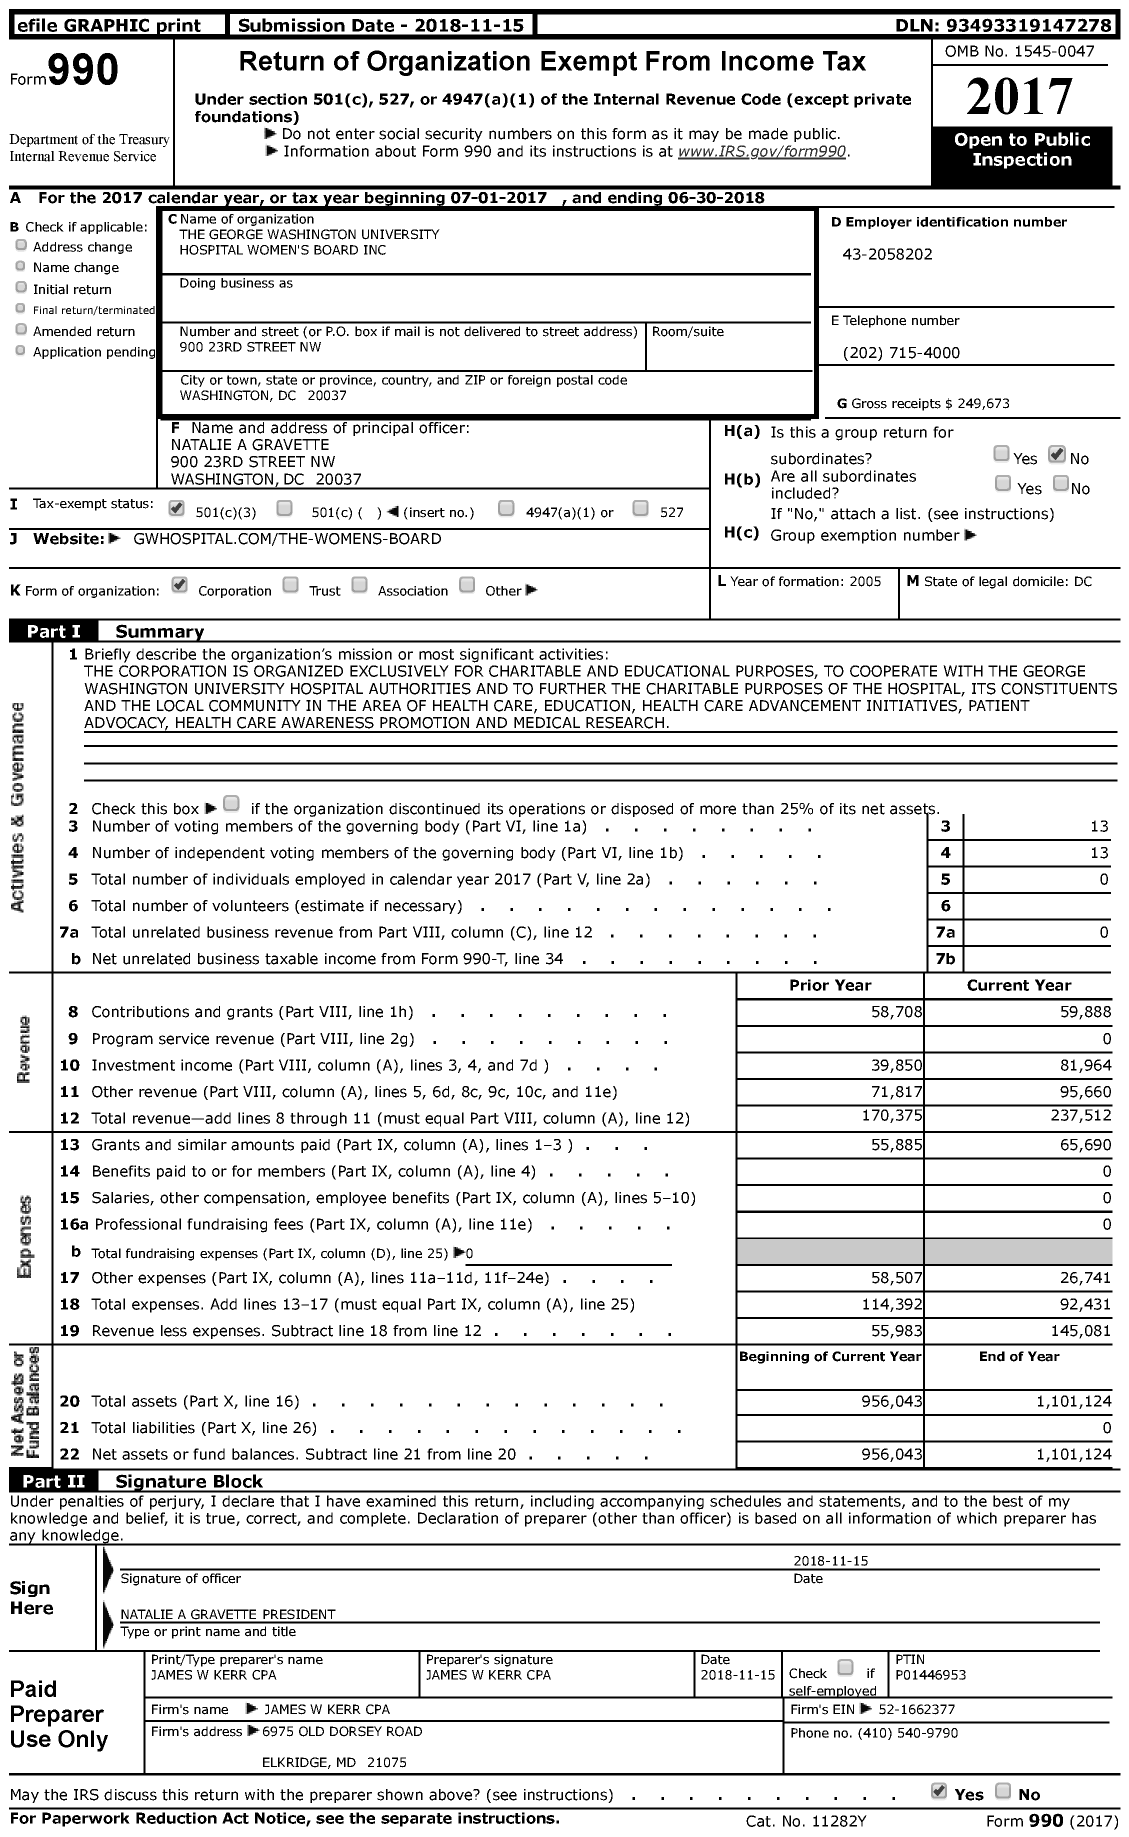 Image of first page of 2017 Form 990 for The George Washington University Hospital Women's Board